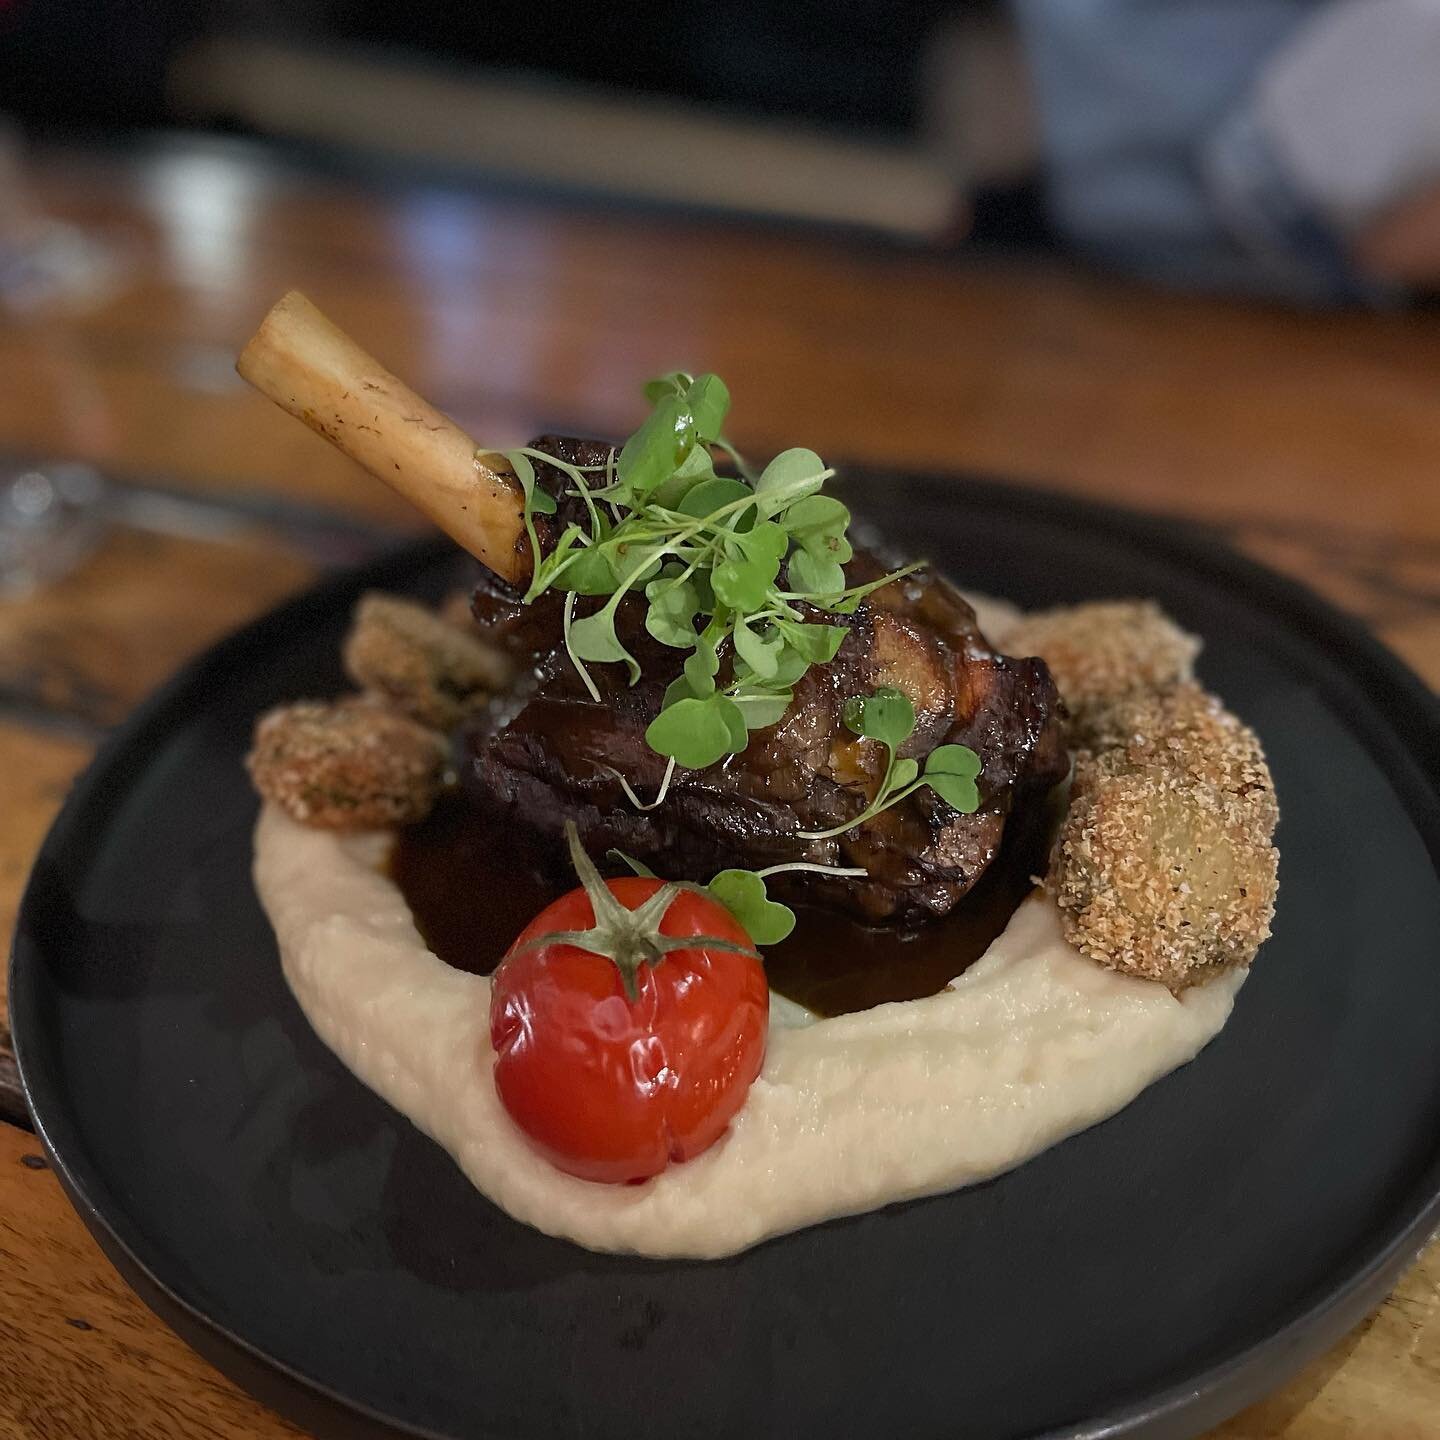 Lamb shank with minted pea &amp; carrot croquettes, vine tomatoes and celeriac puree 🤌🏽